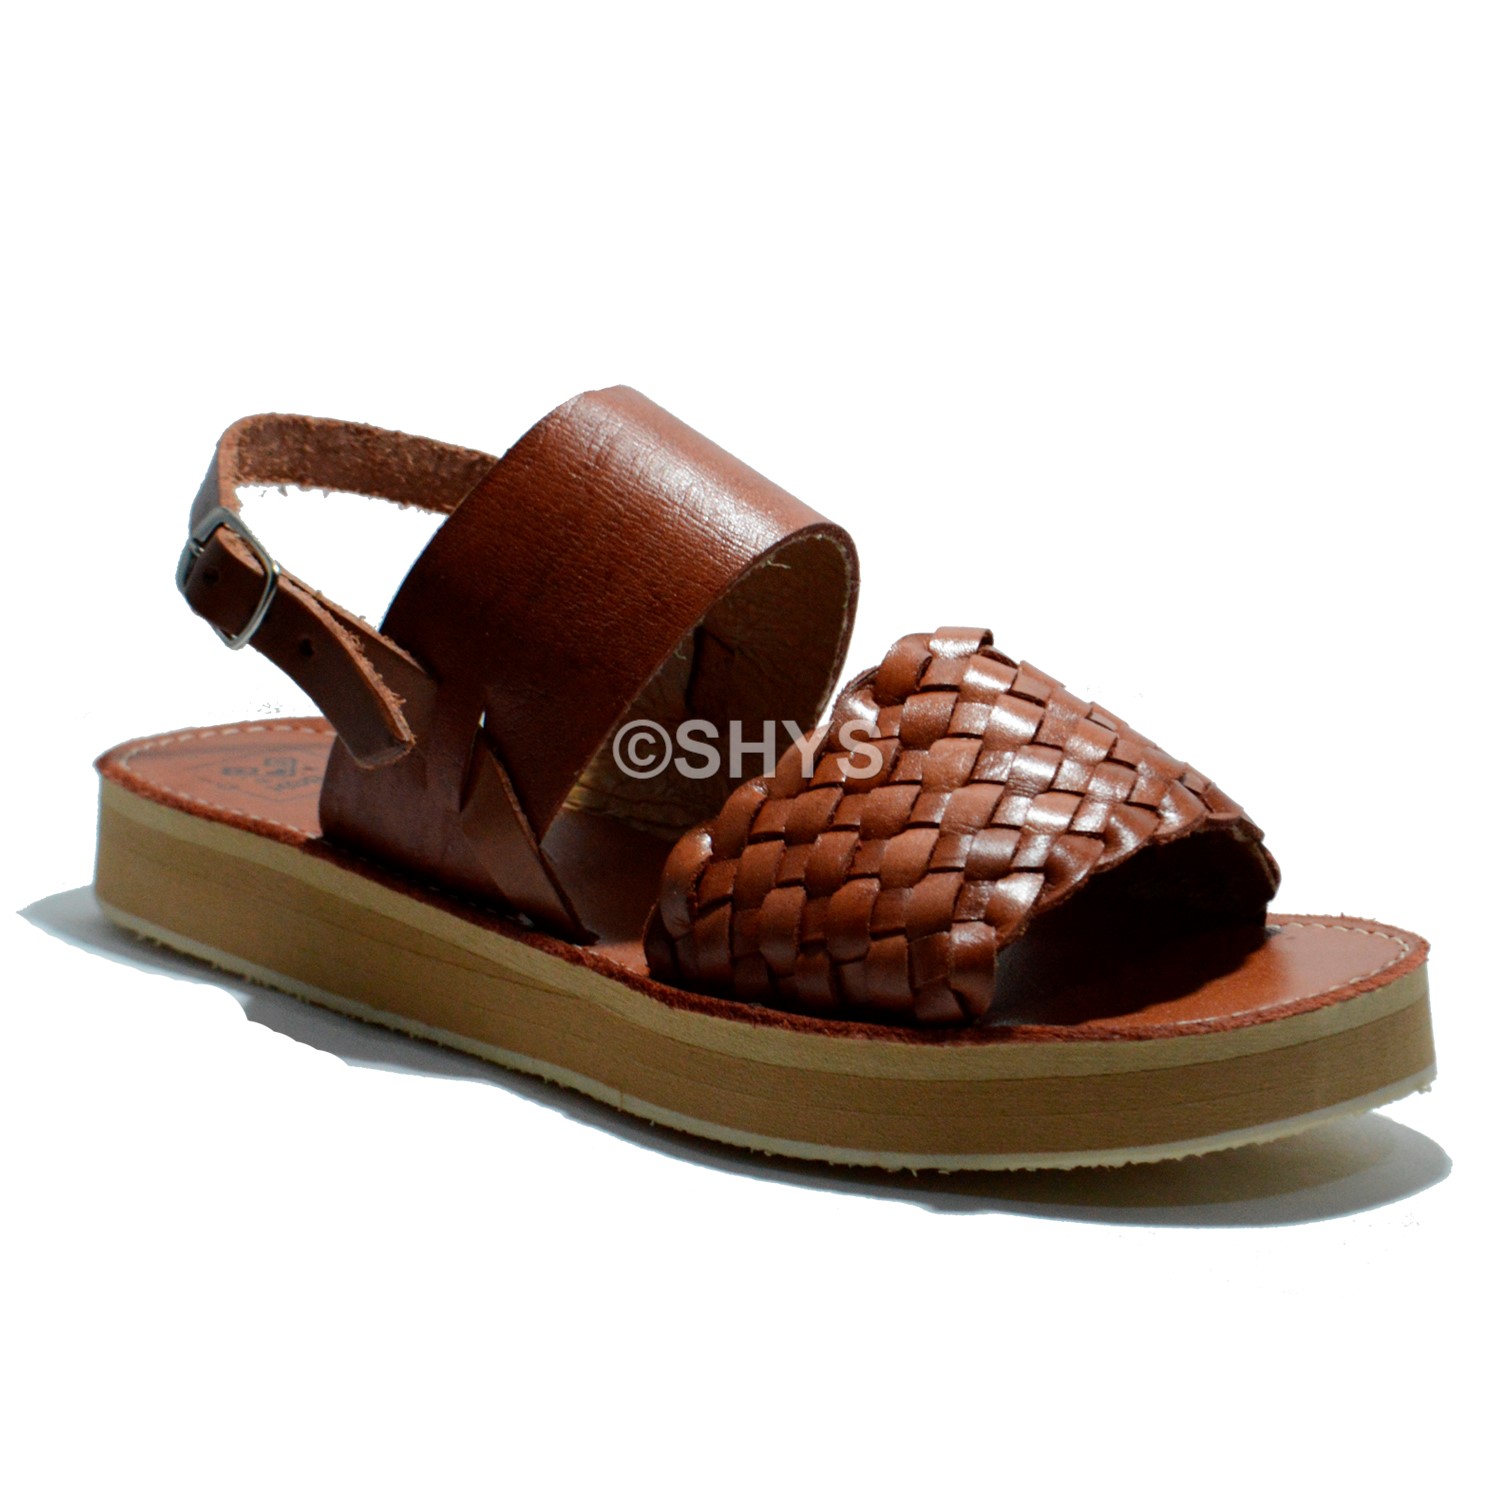 Leather Mexican Sandals For Woman Huaraches Chedron Dds-133